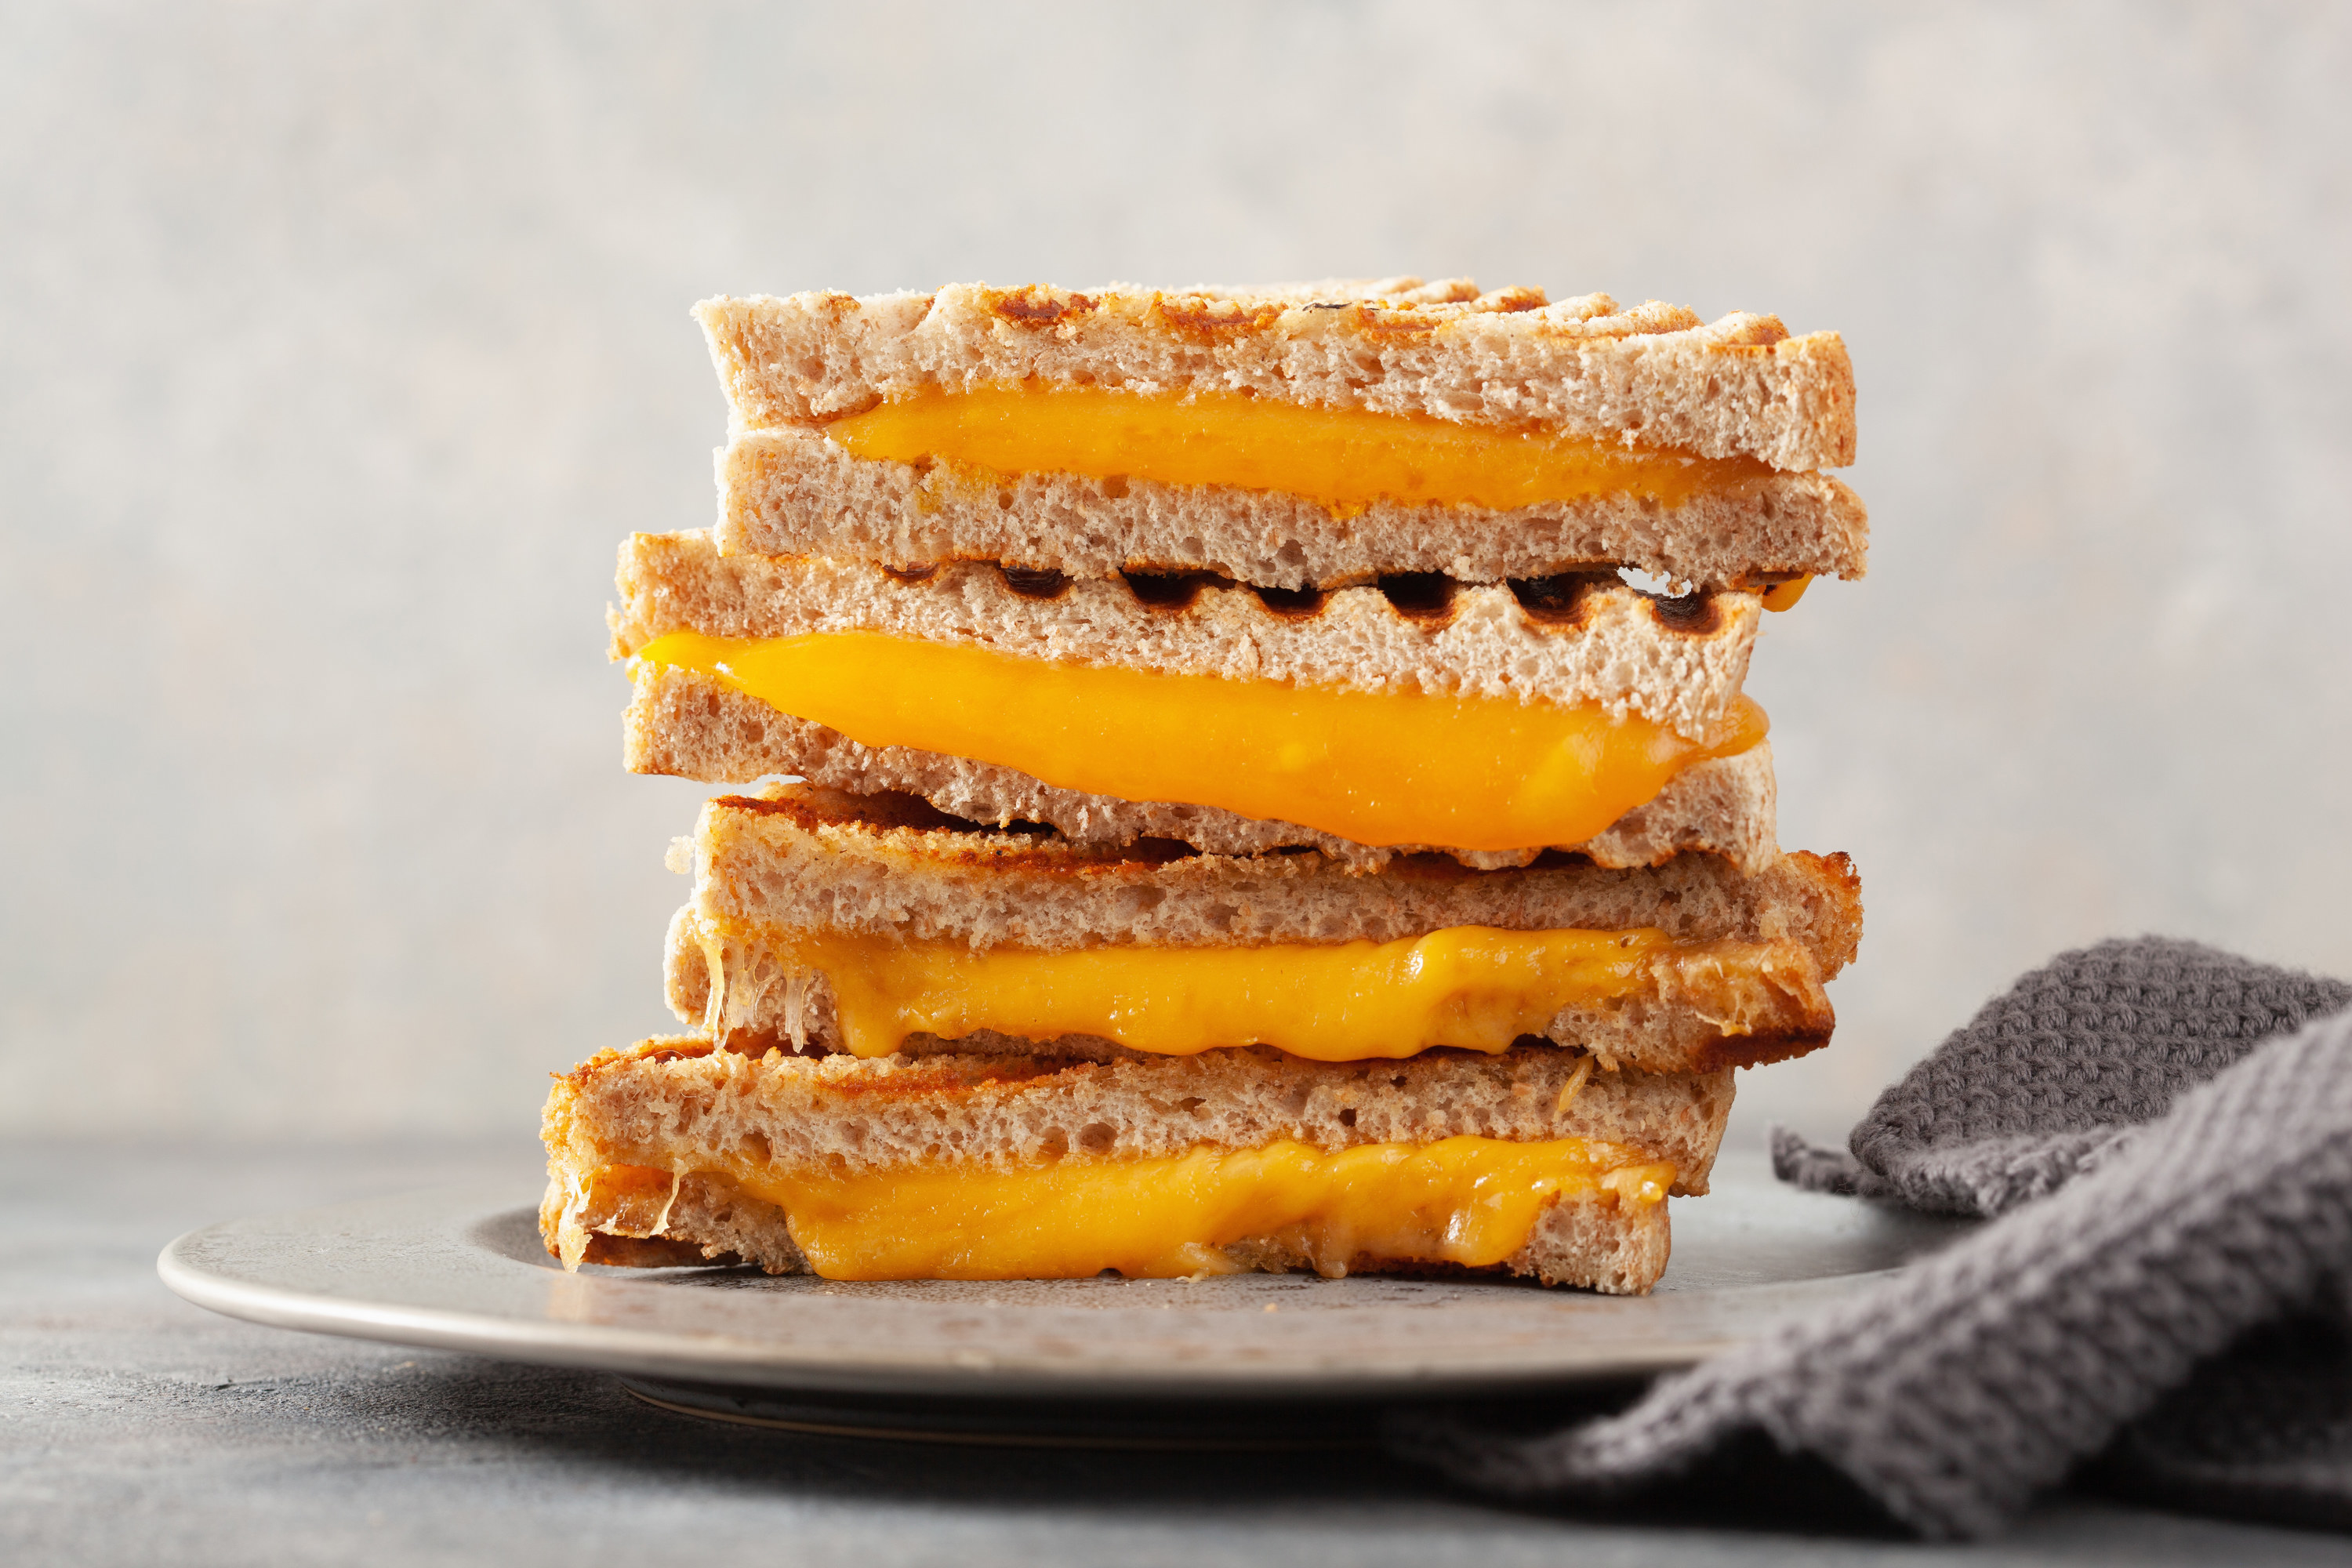 A multilayered grilled cheese